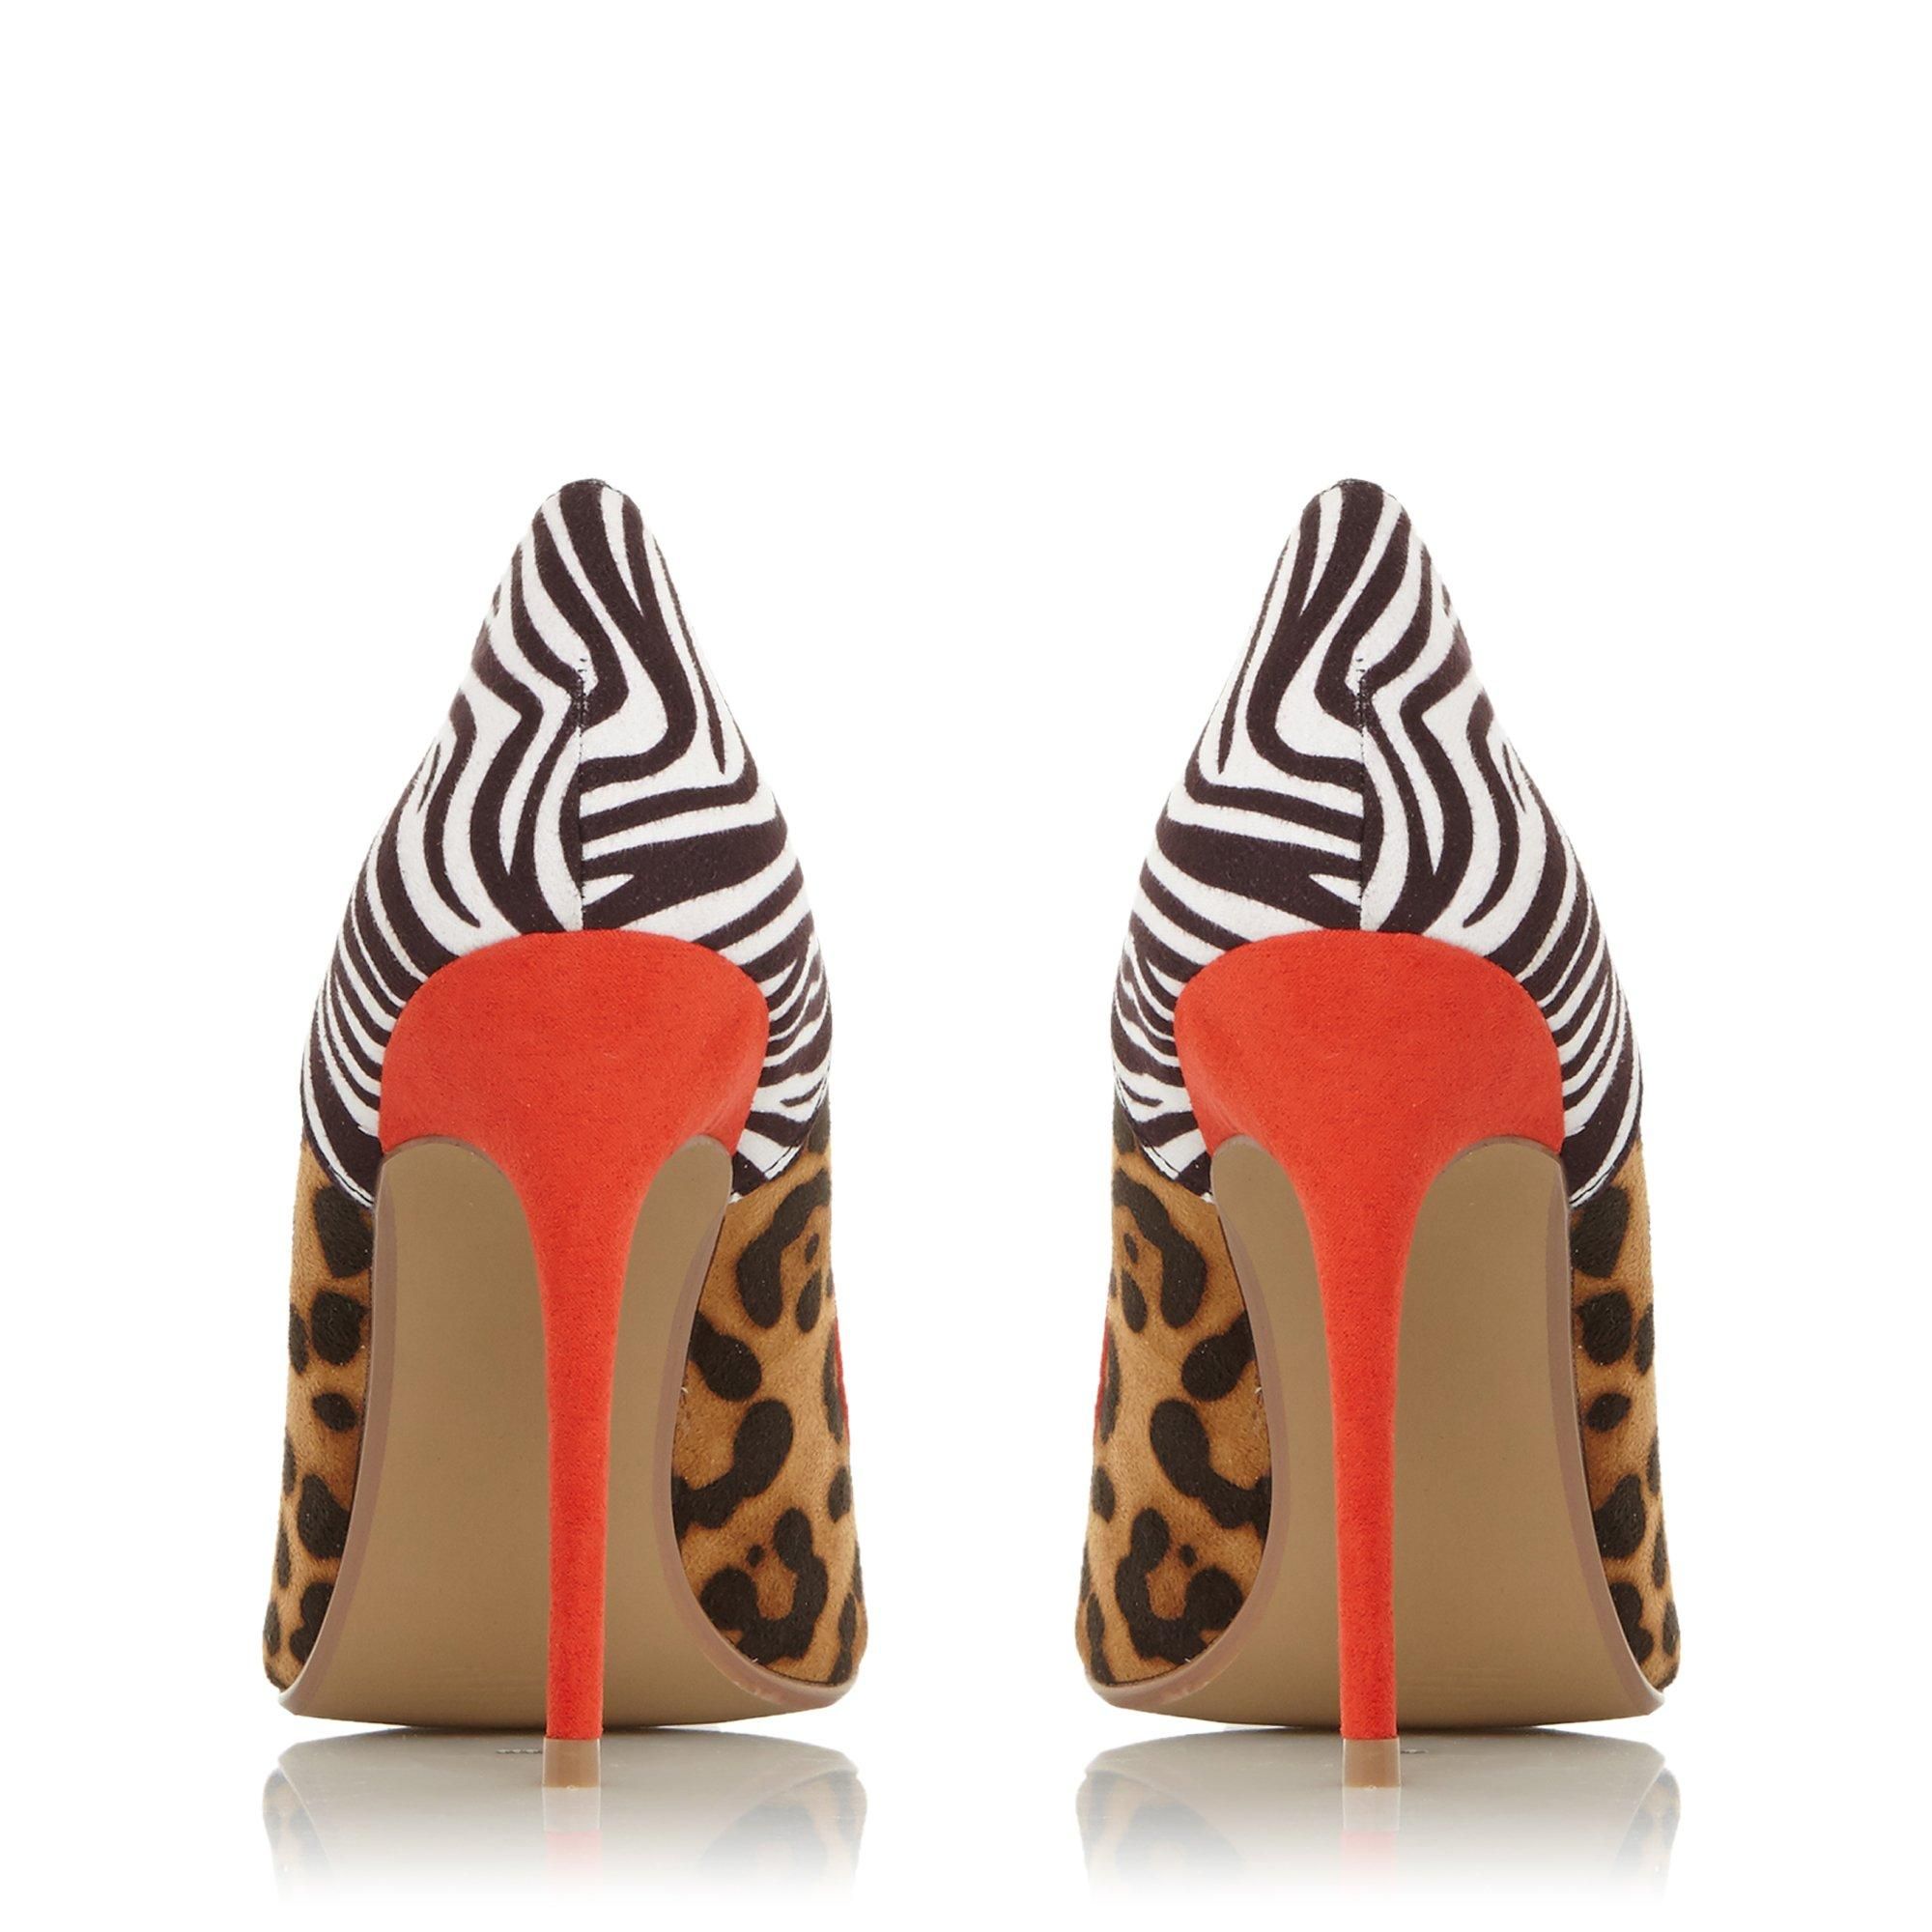 The animal-print heel taking top spot. The Anandi court shoe is a mash-up of the season's key exotic prints. The contrast panels really pop against a pin-sharp stiletto heel.